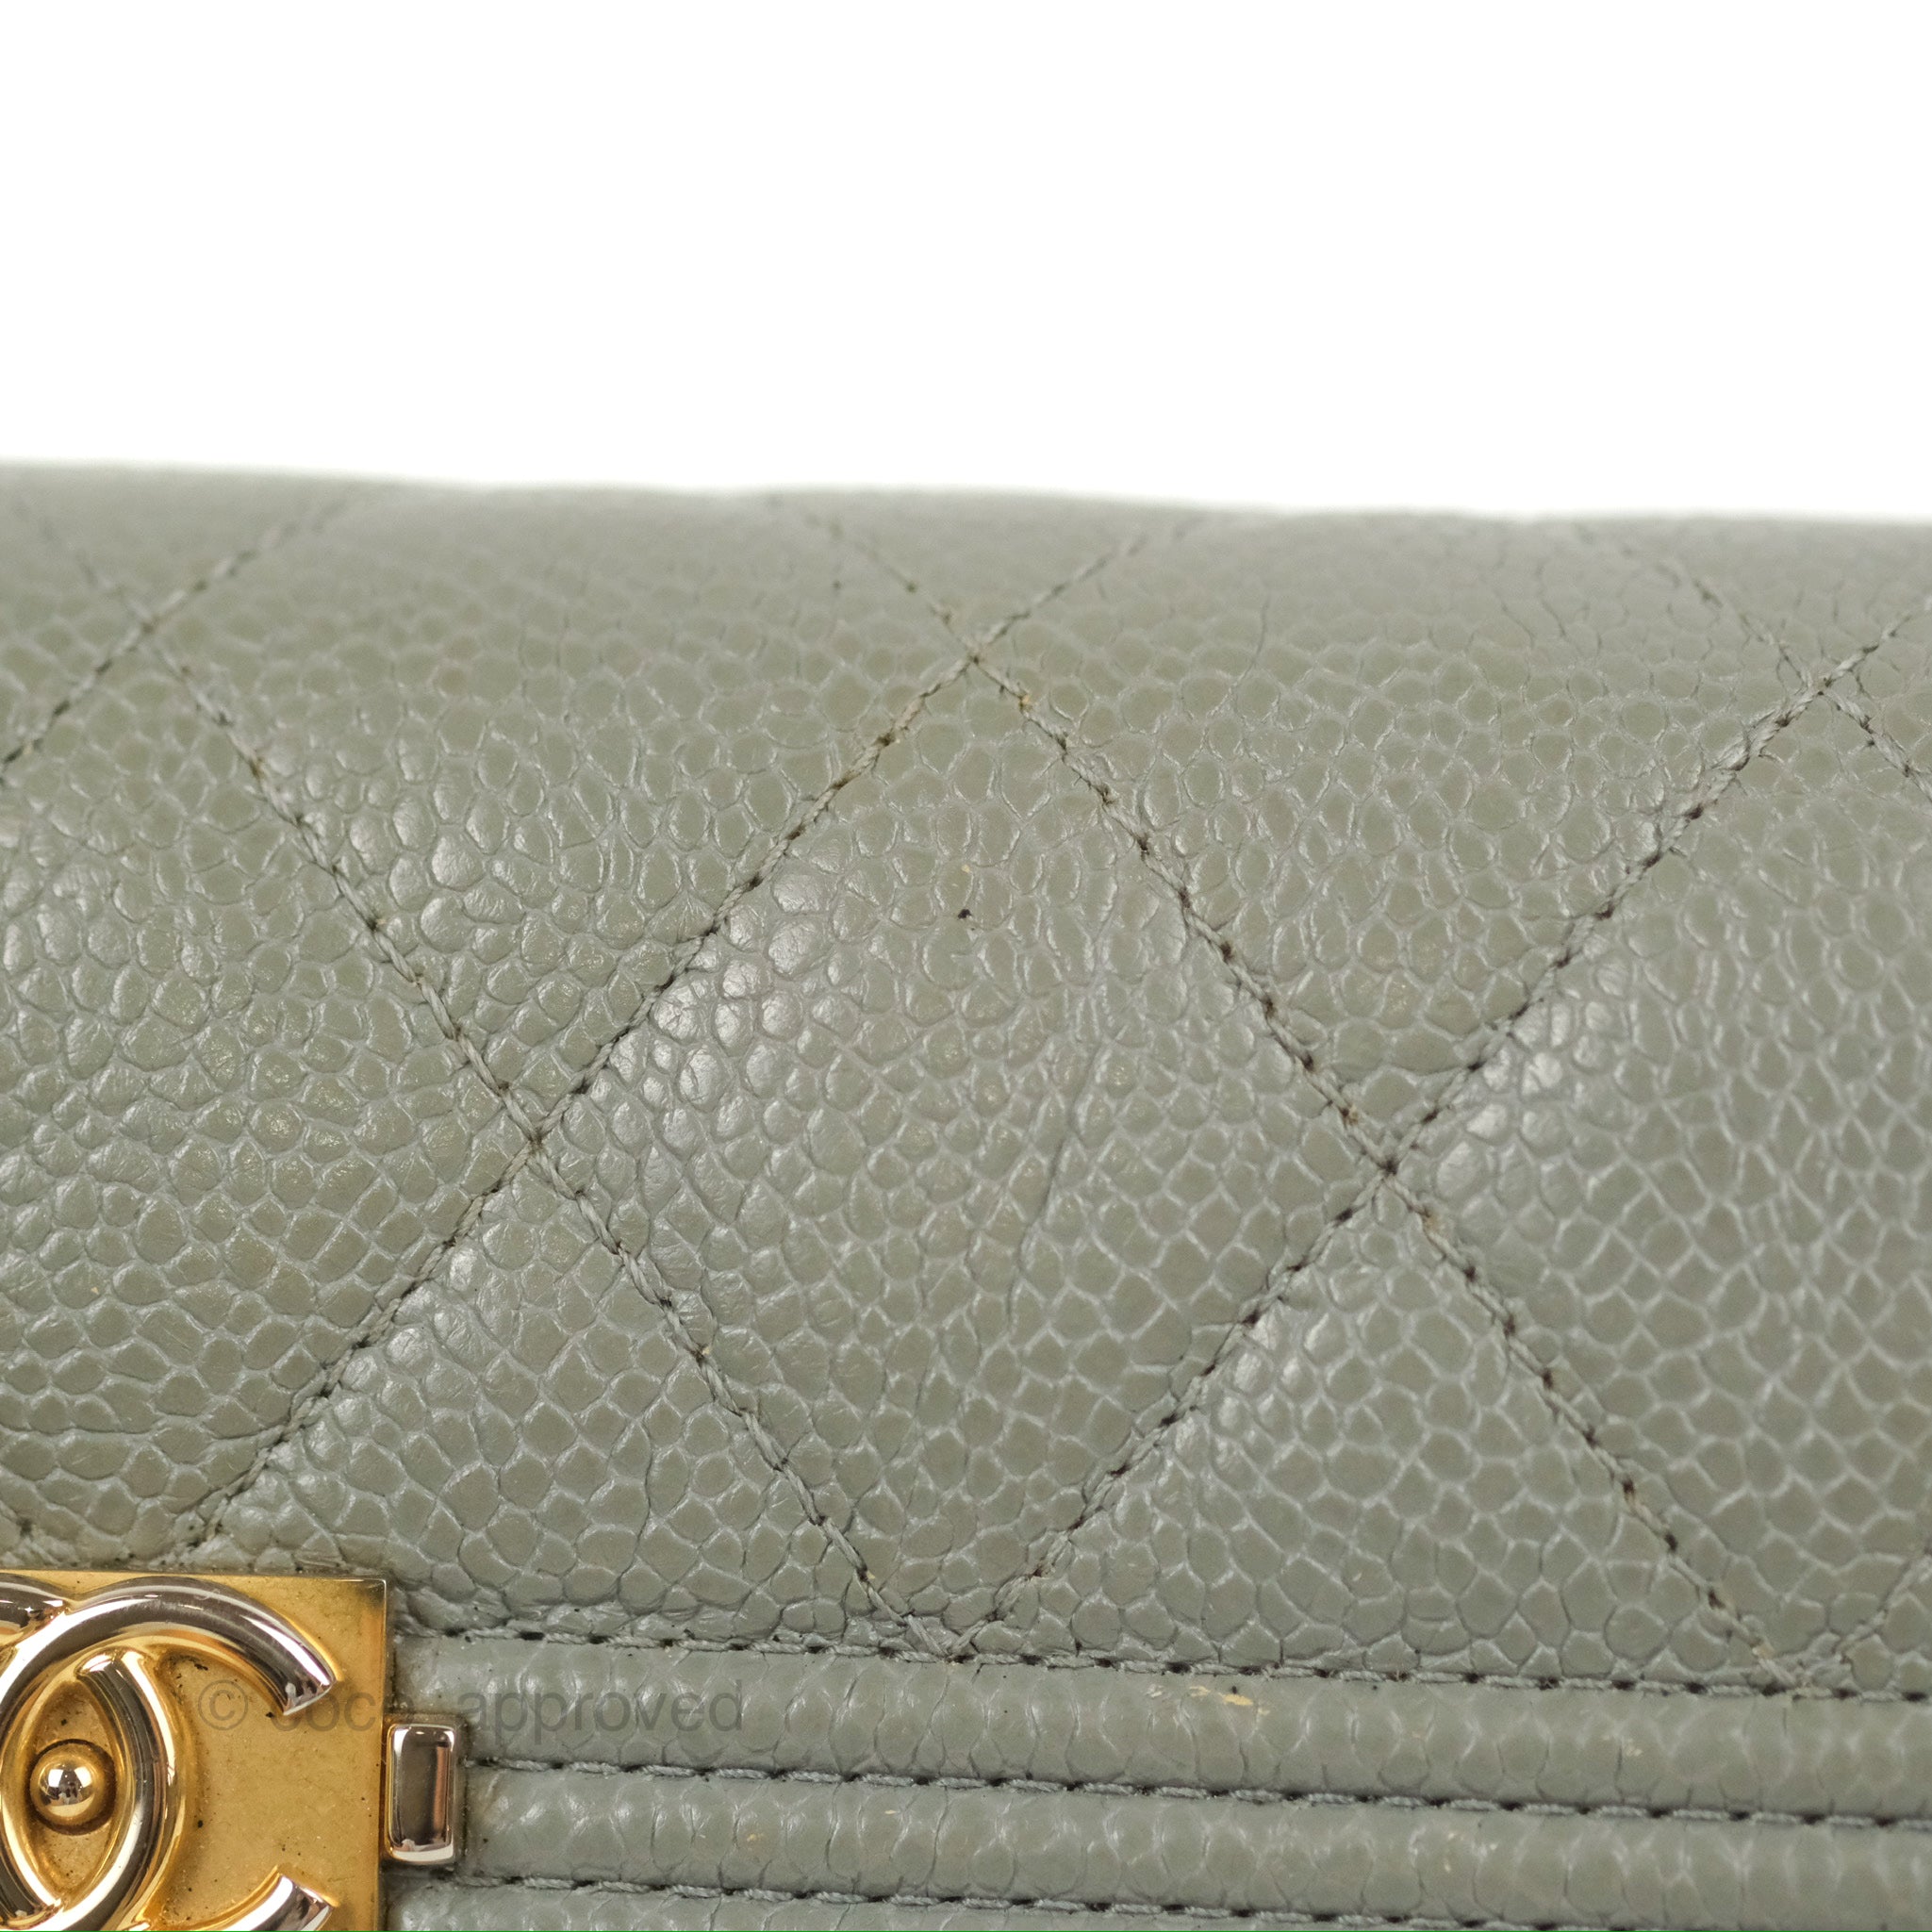 Chanel Quilted Boy Flap Long Wallet Light Green Caviar Gold